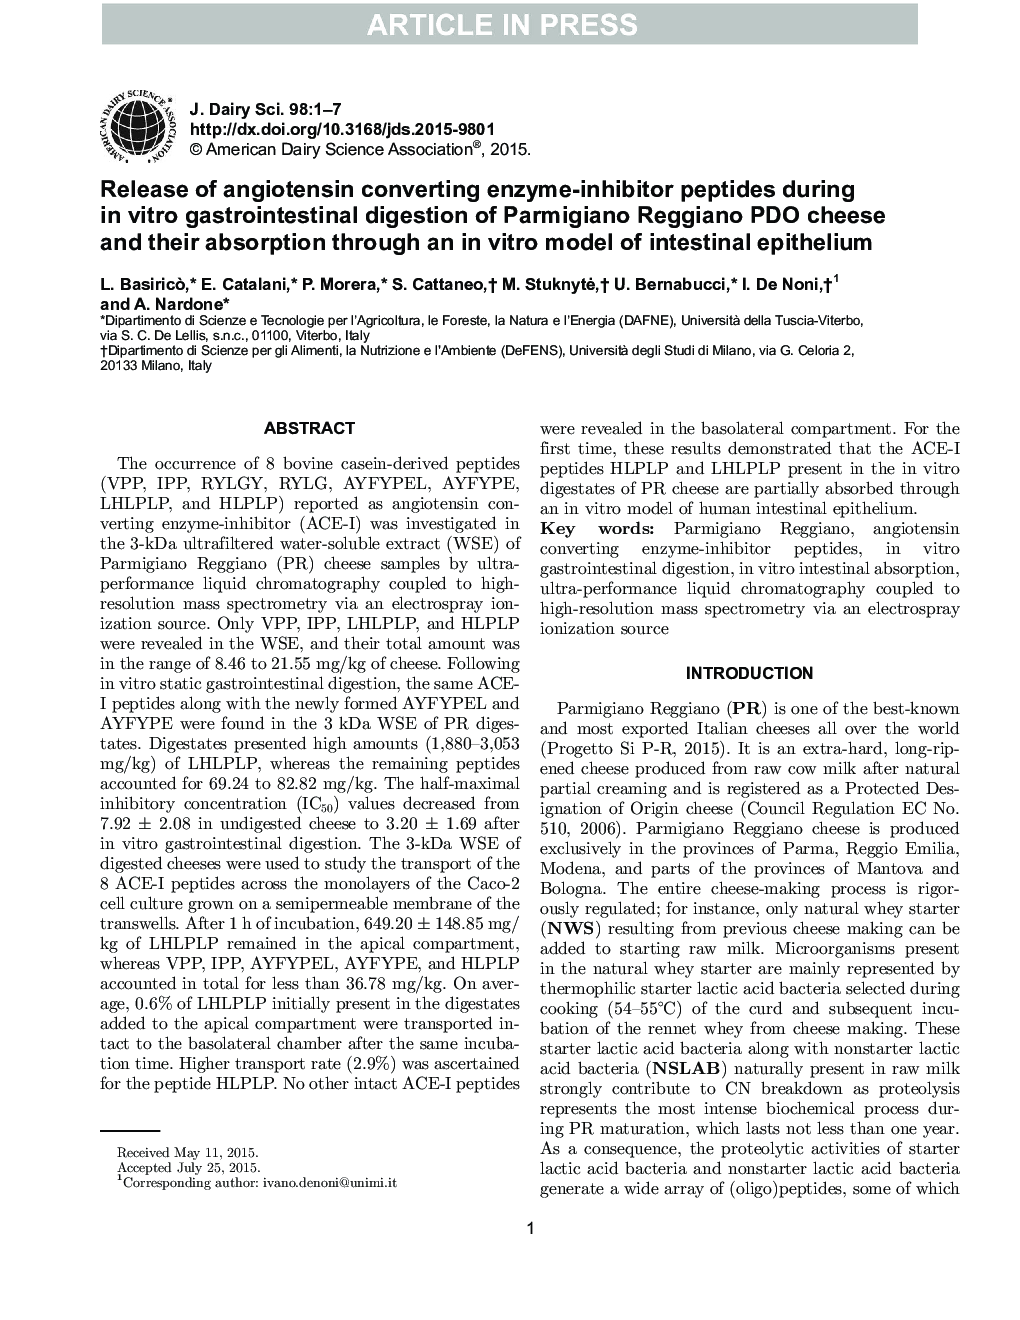 Release of angiotensin converting enzyme-inhibitor peptides during in vitro gastrointestinal digestion of Parmigiano Reggiano PDO cheese and their absorption through an in vitro model of intestinal epithelium